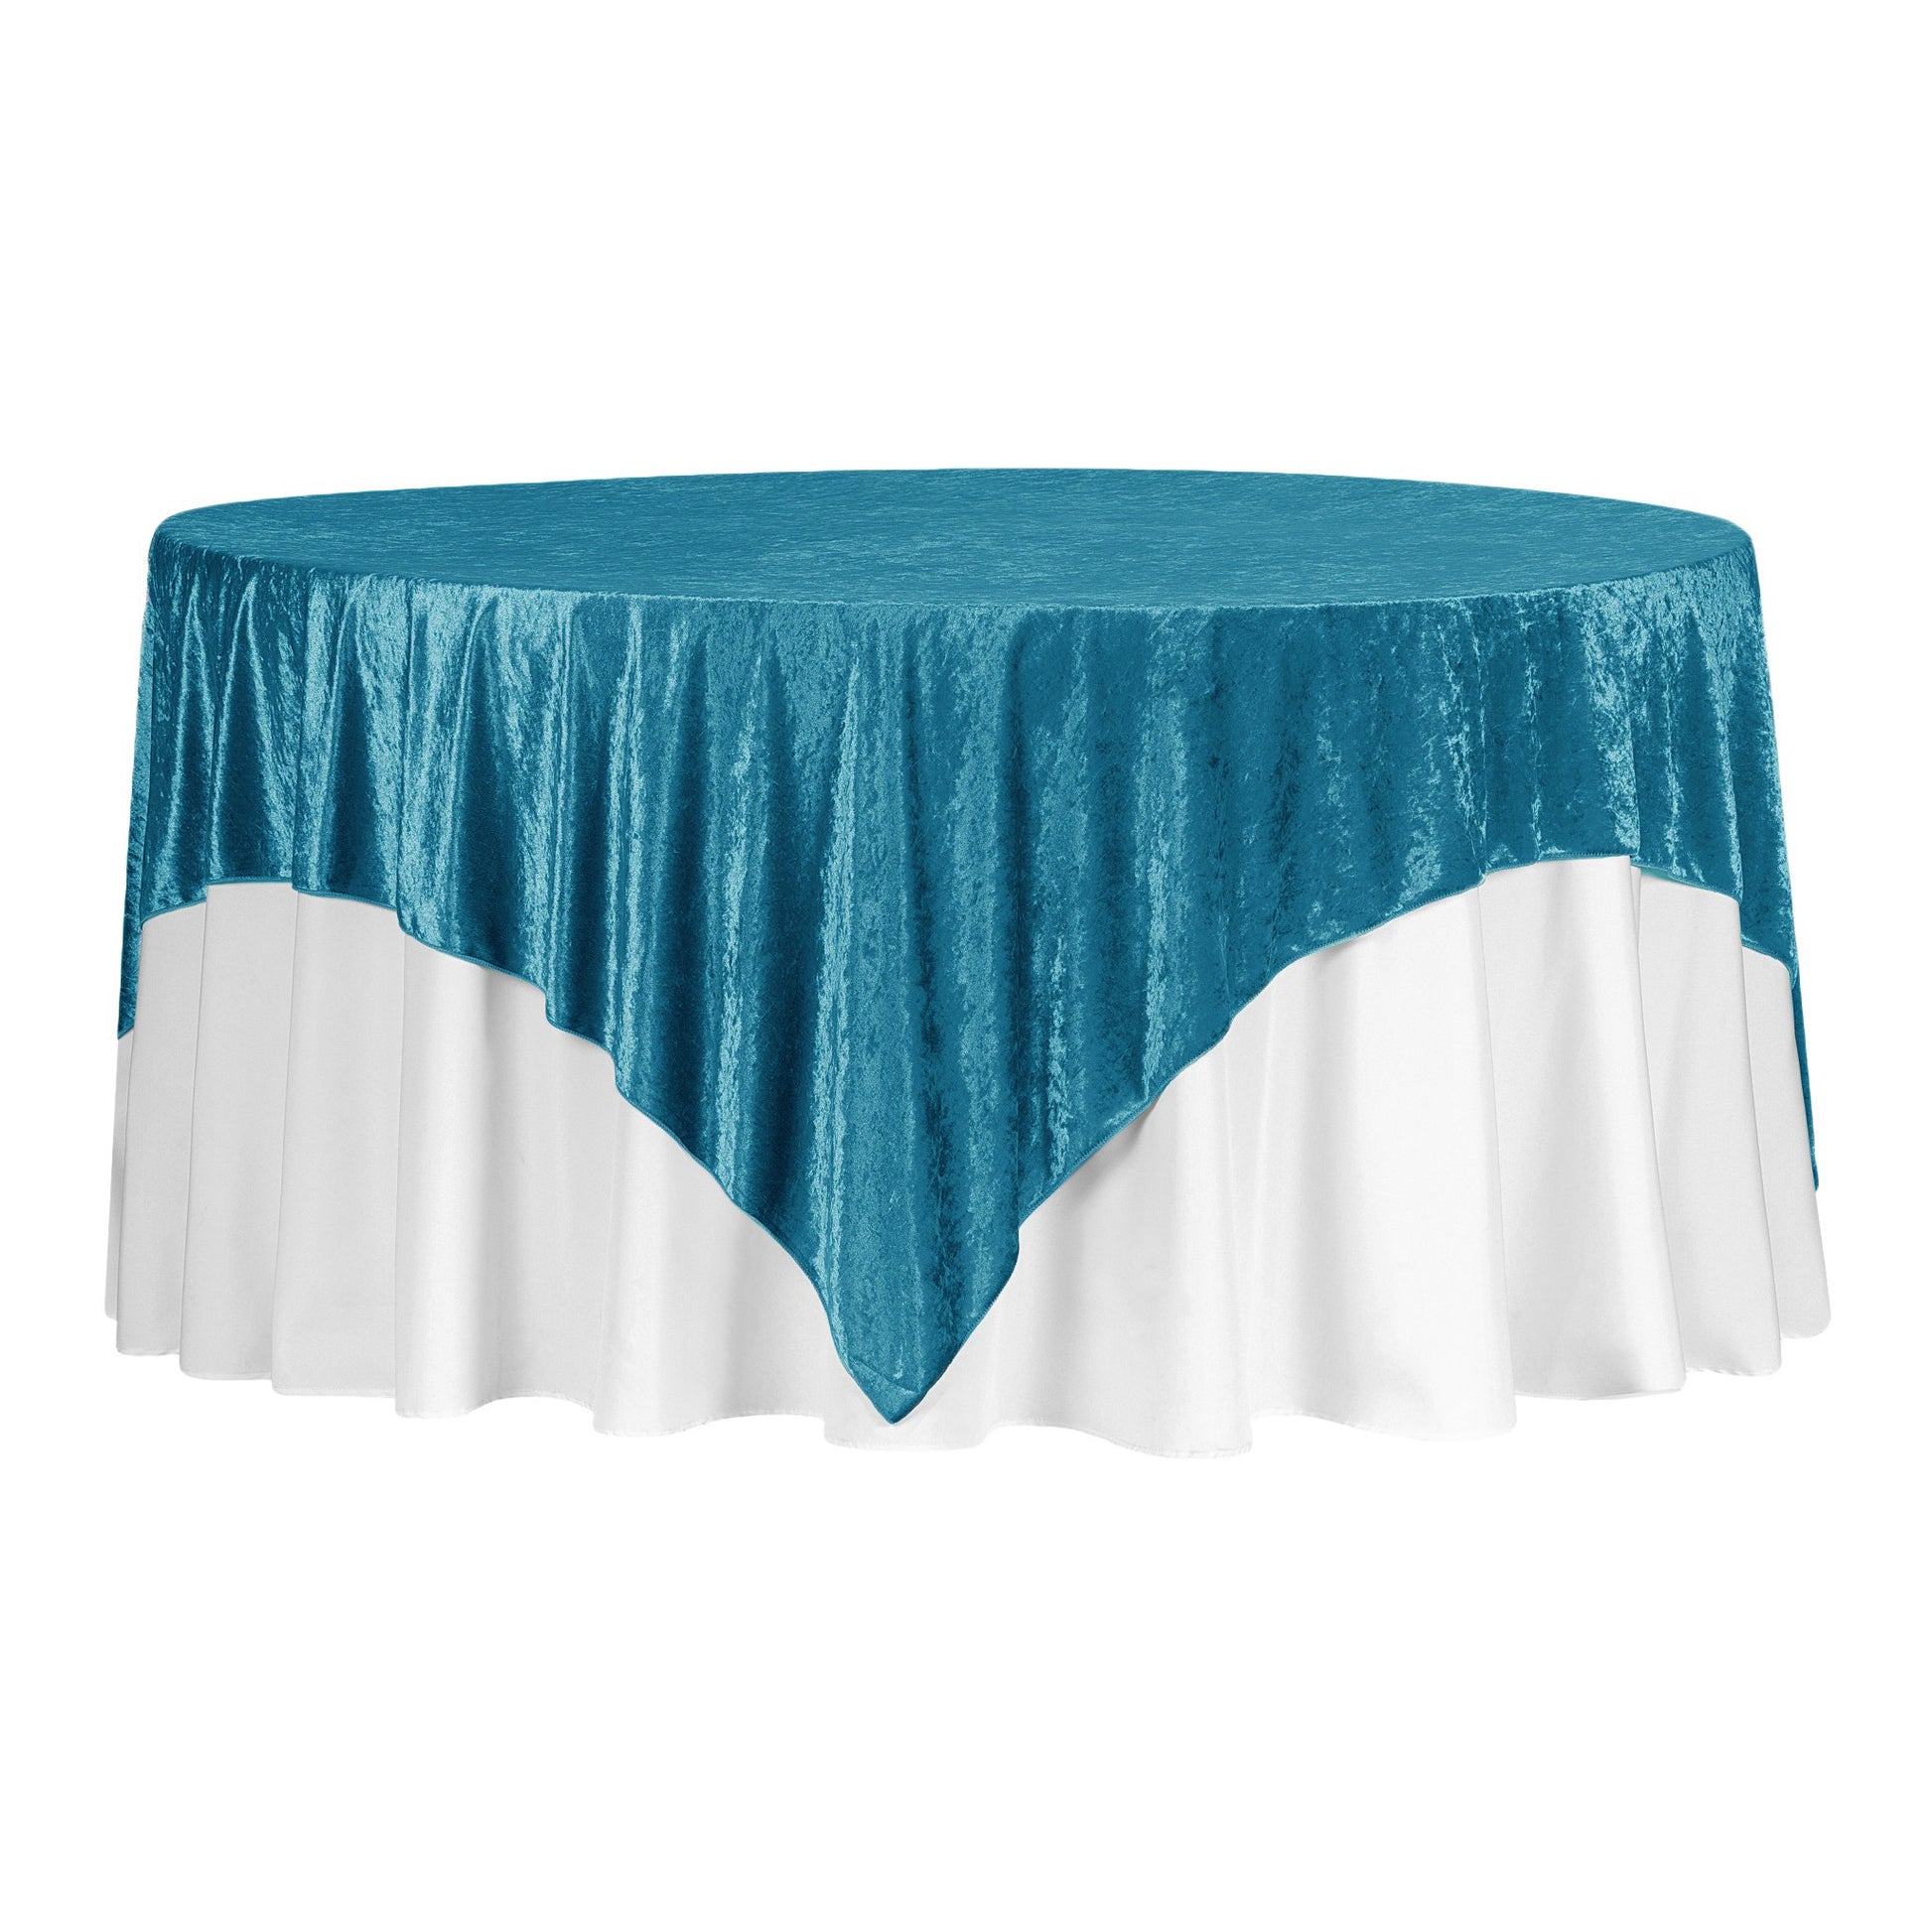 Velvet 85"x85" Square Tablecloth Table Overlay - Peacock Teal